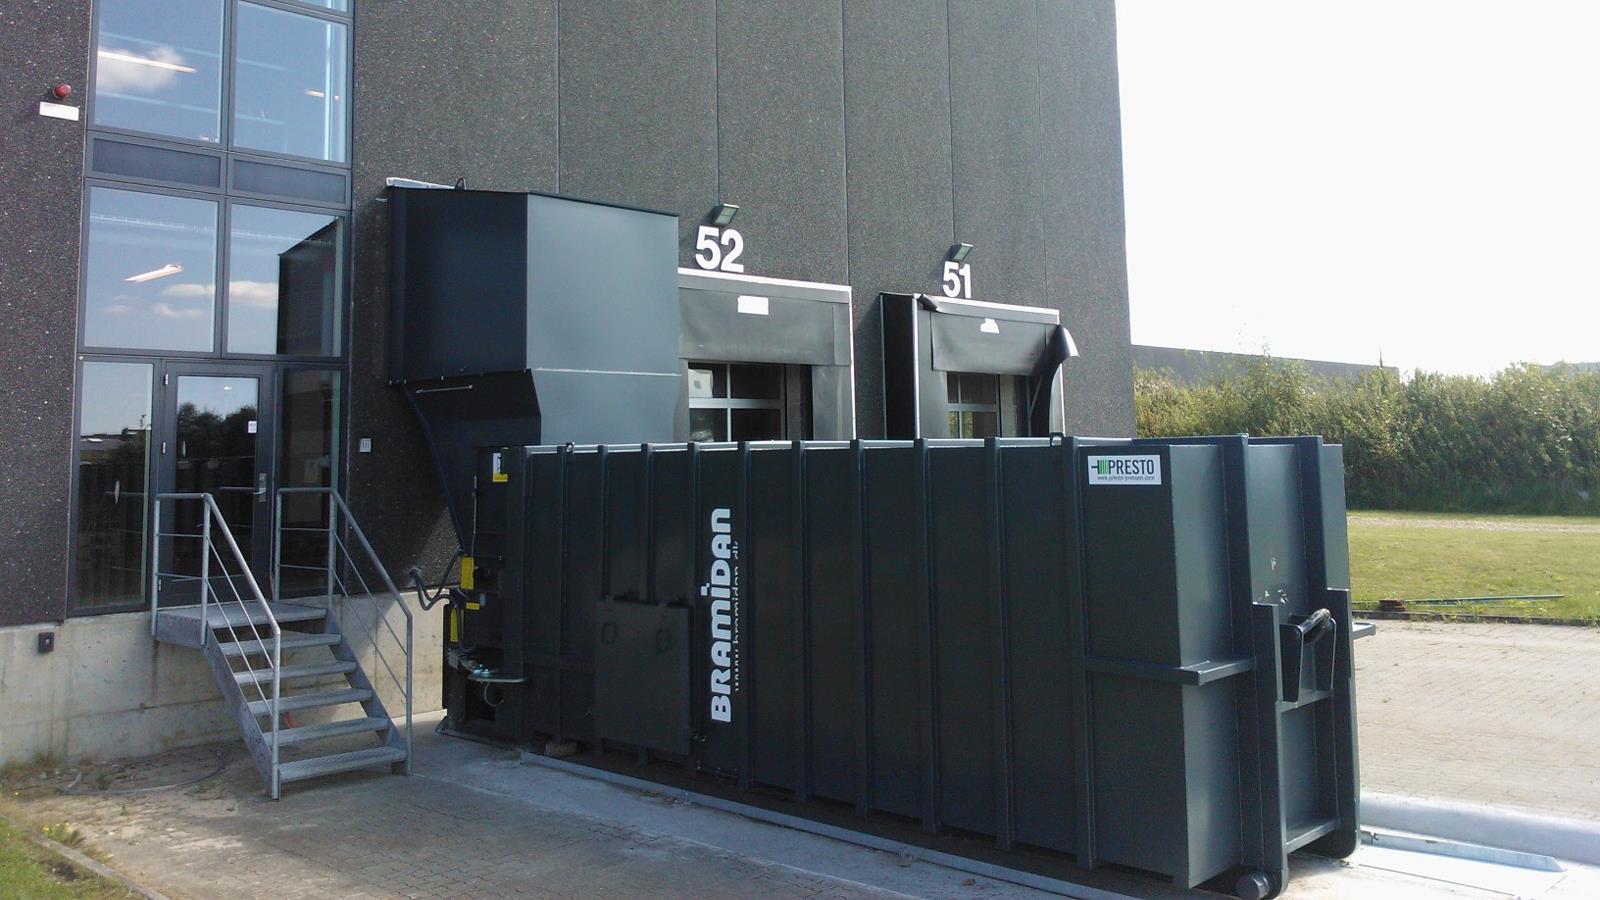 Bramidan compactor with filling through wall standing outside Prime Cargo building